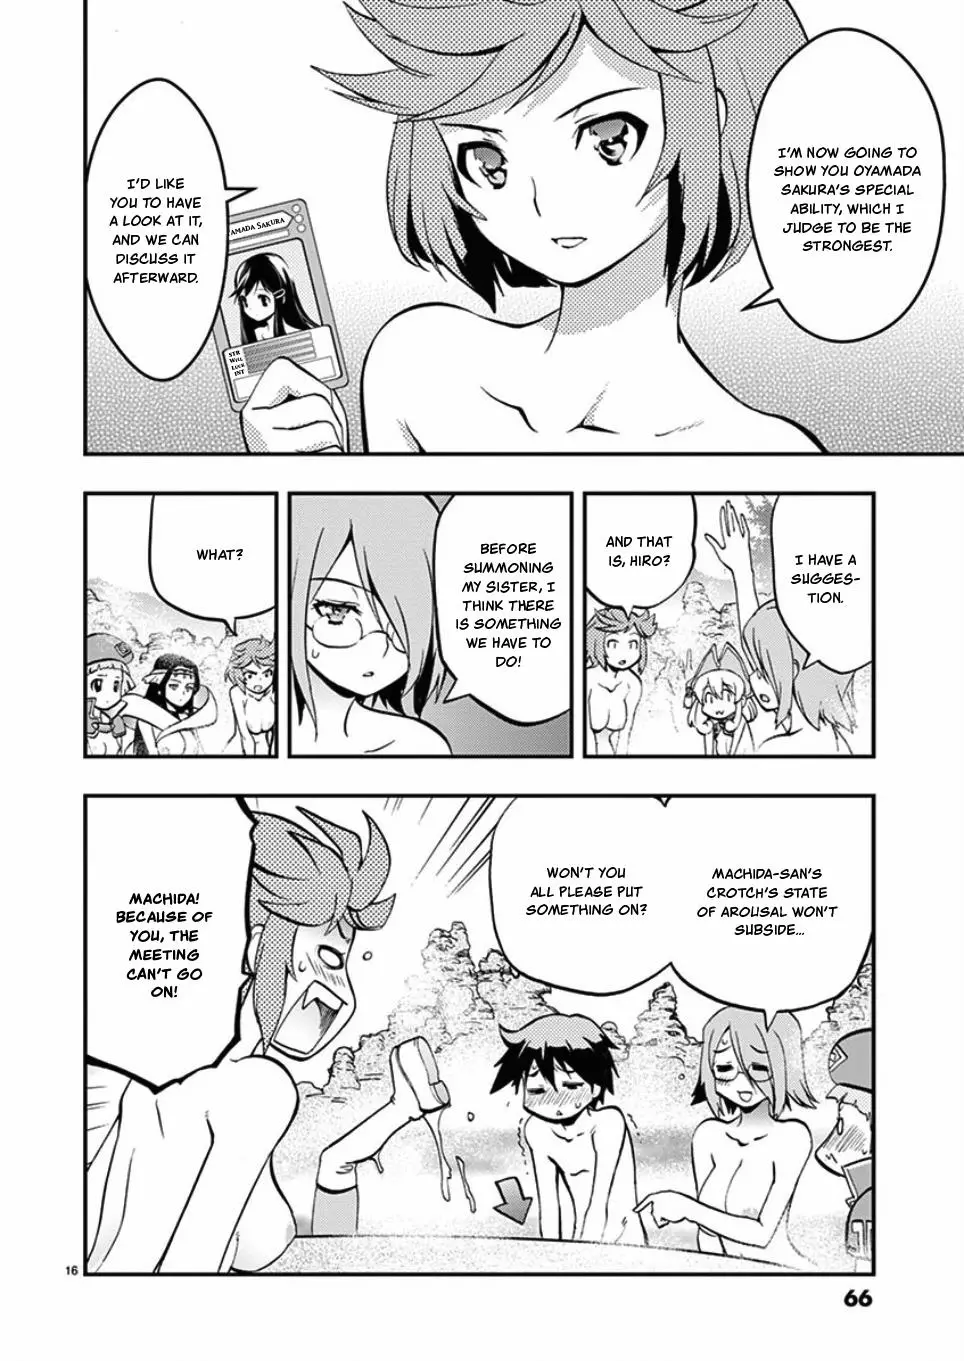 Card Girl! Maiden Summoning Undressing Wars - 39 page 16-17614430